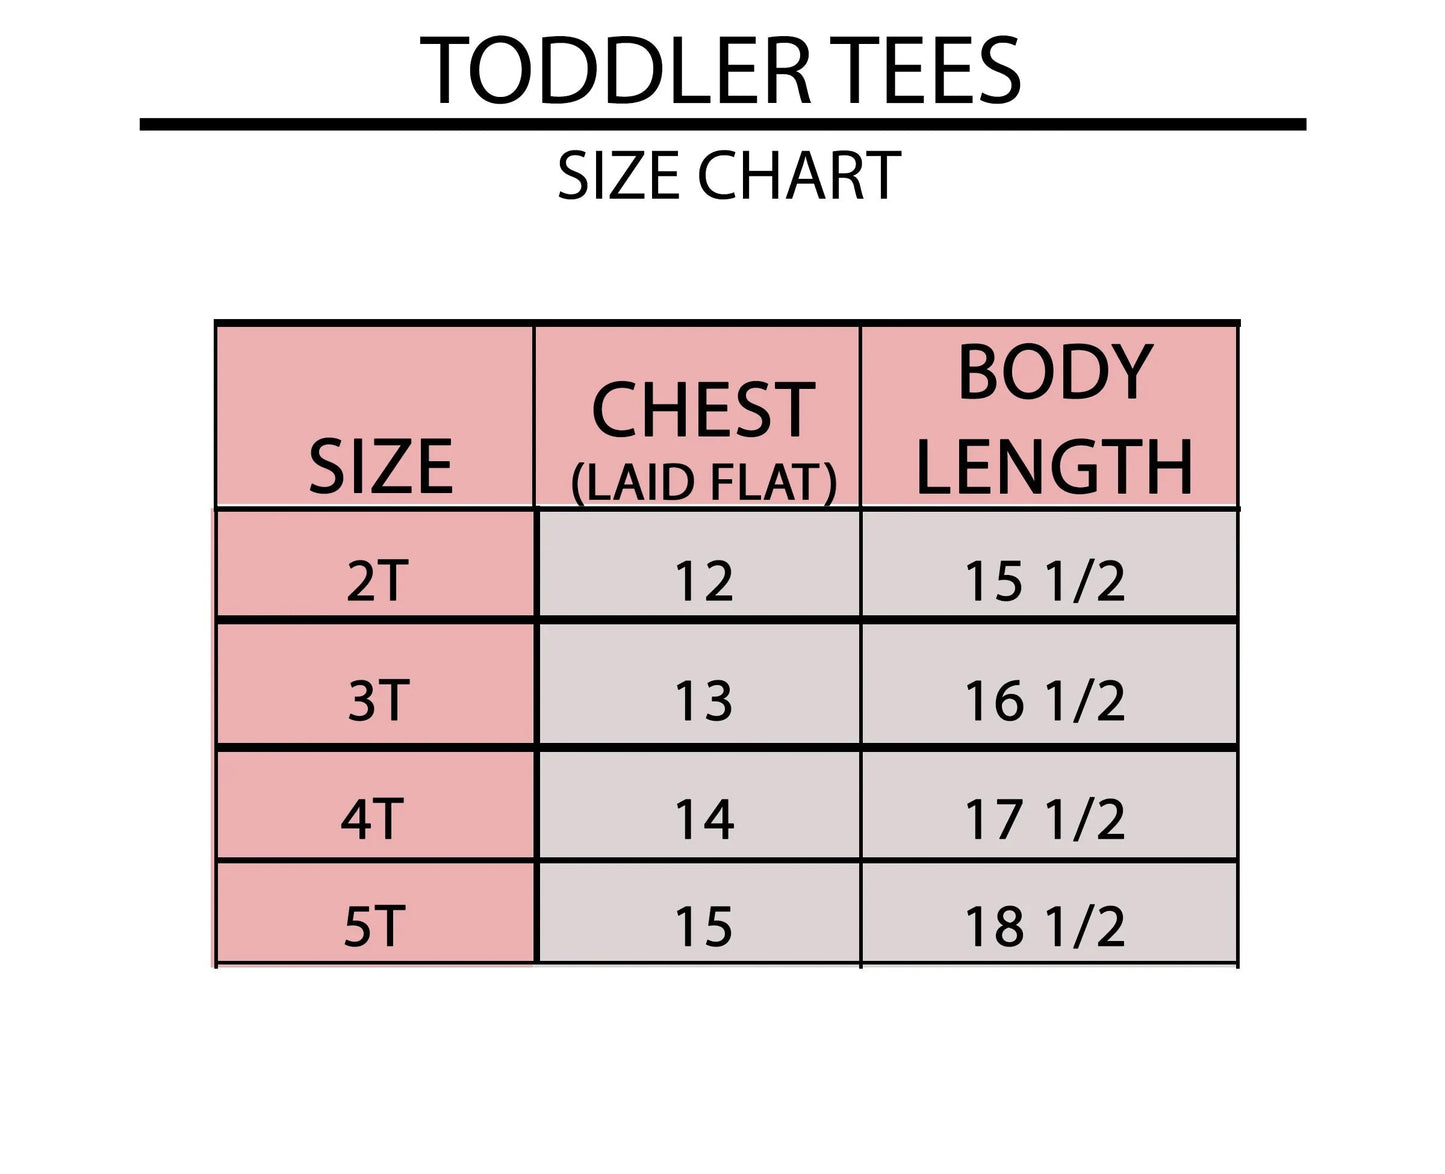 Red White And Cute Stars | Toddler Short Sleeve Crew Neck